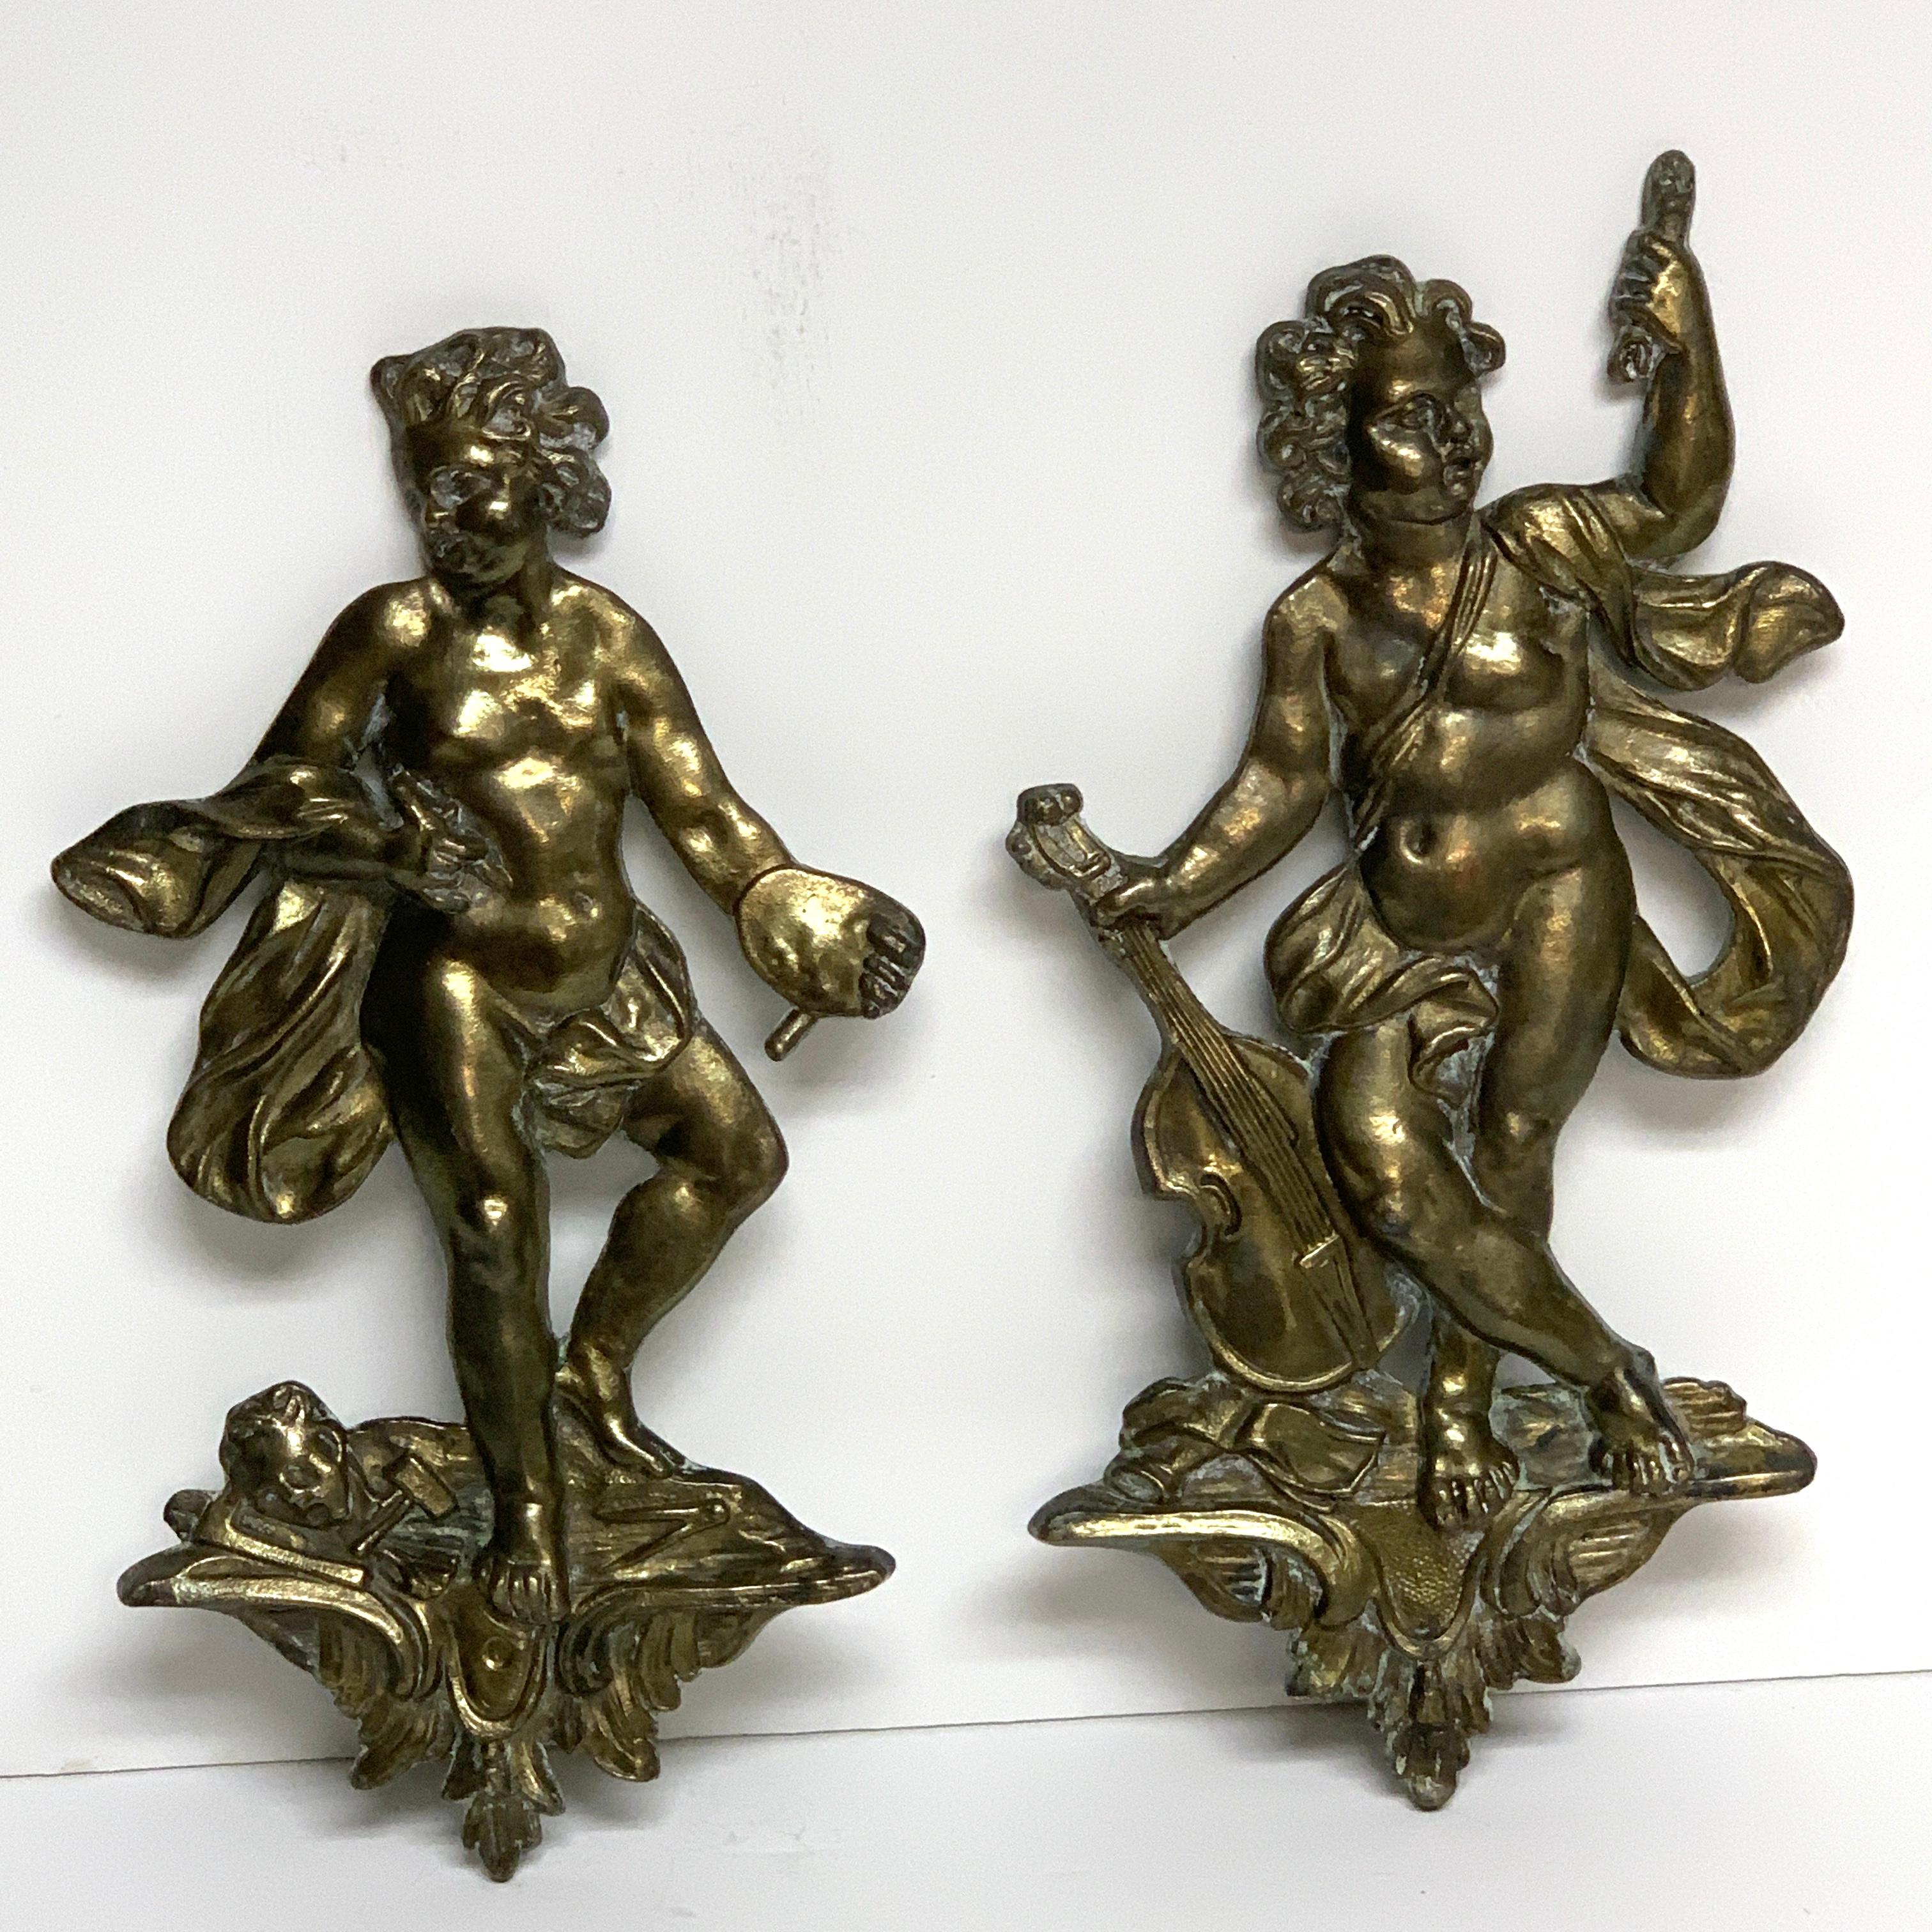 Pair of antique French bronze appliqués depicting art and music, each one finely cast draped putto one holding an artists palette the other a lute.
Art measures: 10.5